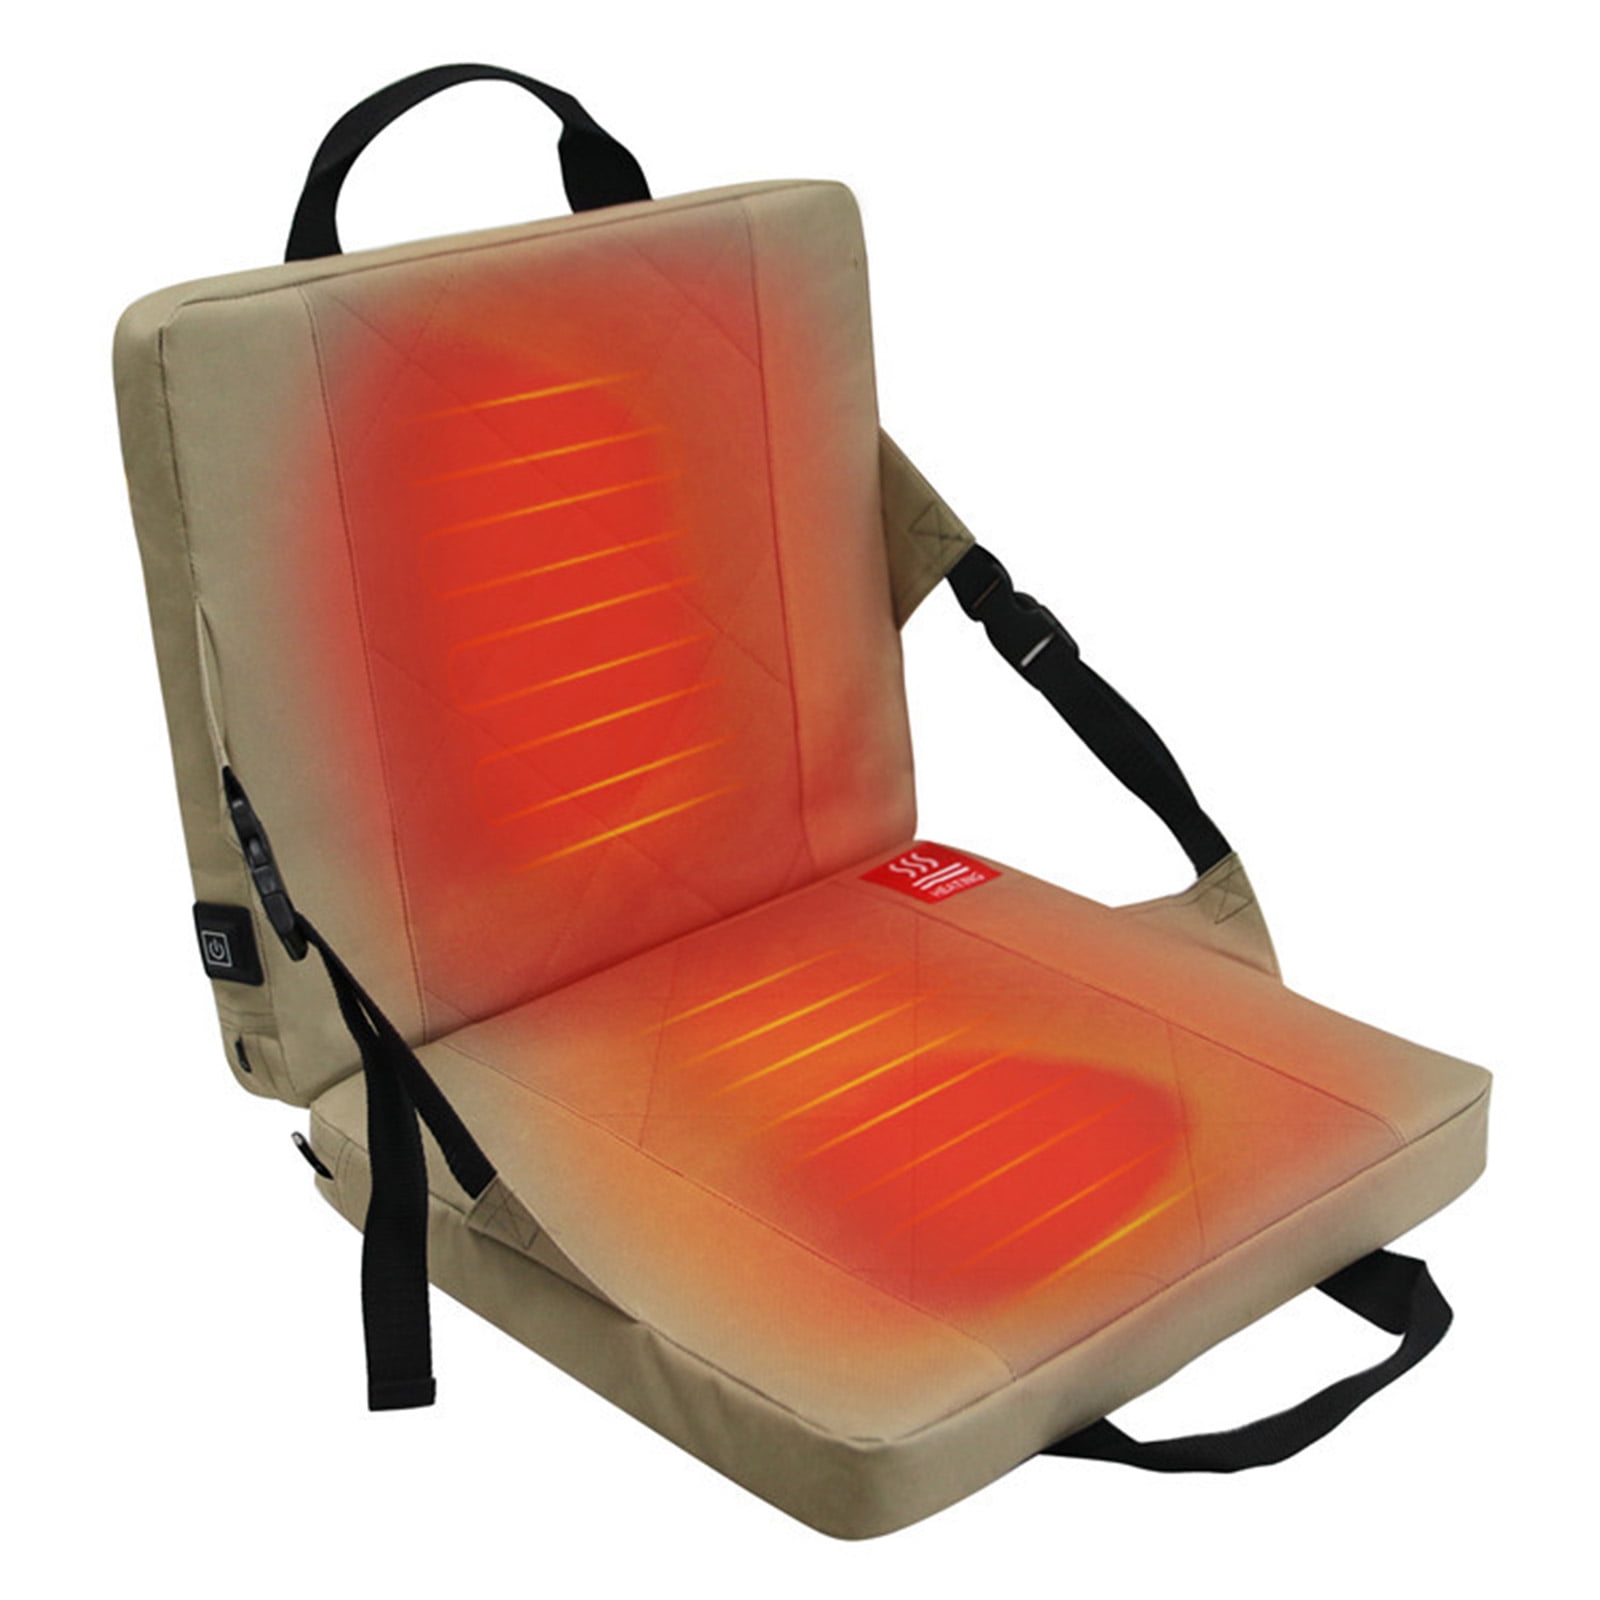 Heated Seat Cushion Cordless Rechargeable Stadium Seat Pad 149F USB Battery  Heated Bleacher Cushion Portable Heating Pad for Outdoor Camping $35. Free  for USA. Interested DM me for Details : r/ReviewRequests